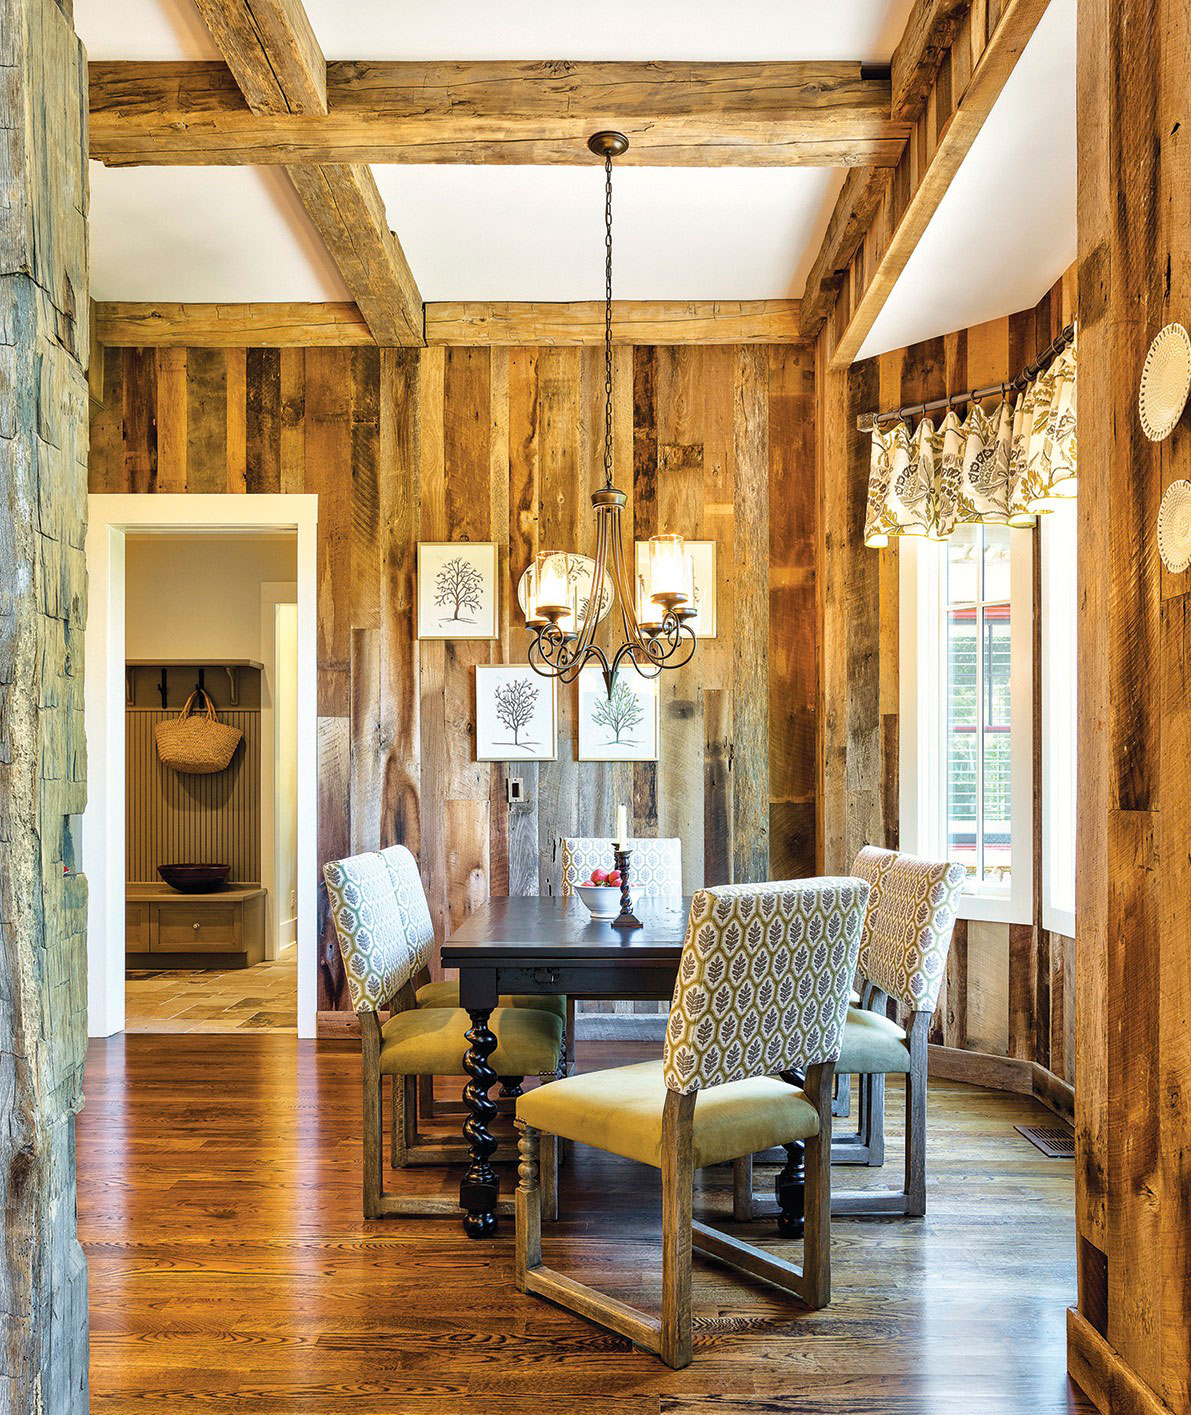 Reclaimed timber from Appalachian Antique Hardwoods figures prominently on the walls, columns and beams in the main living areas. Stained white oak floors from Gennett Lumber and Hardwood Flooring in Asheville adds to the warmth of the dining area.